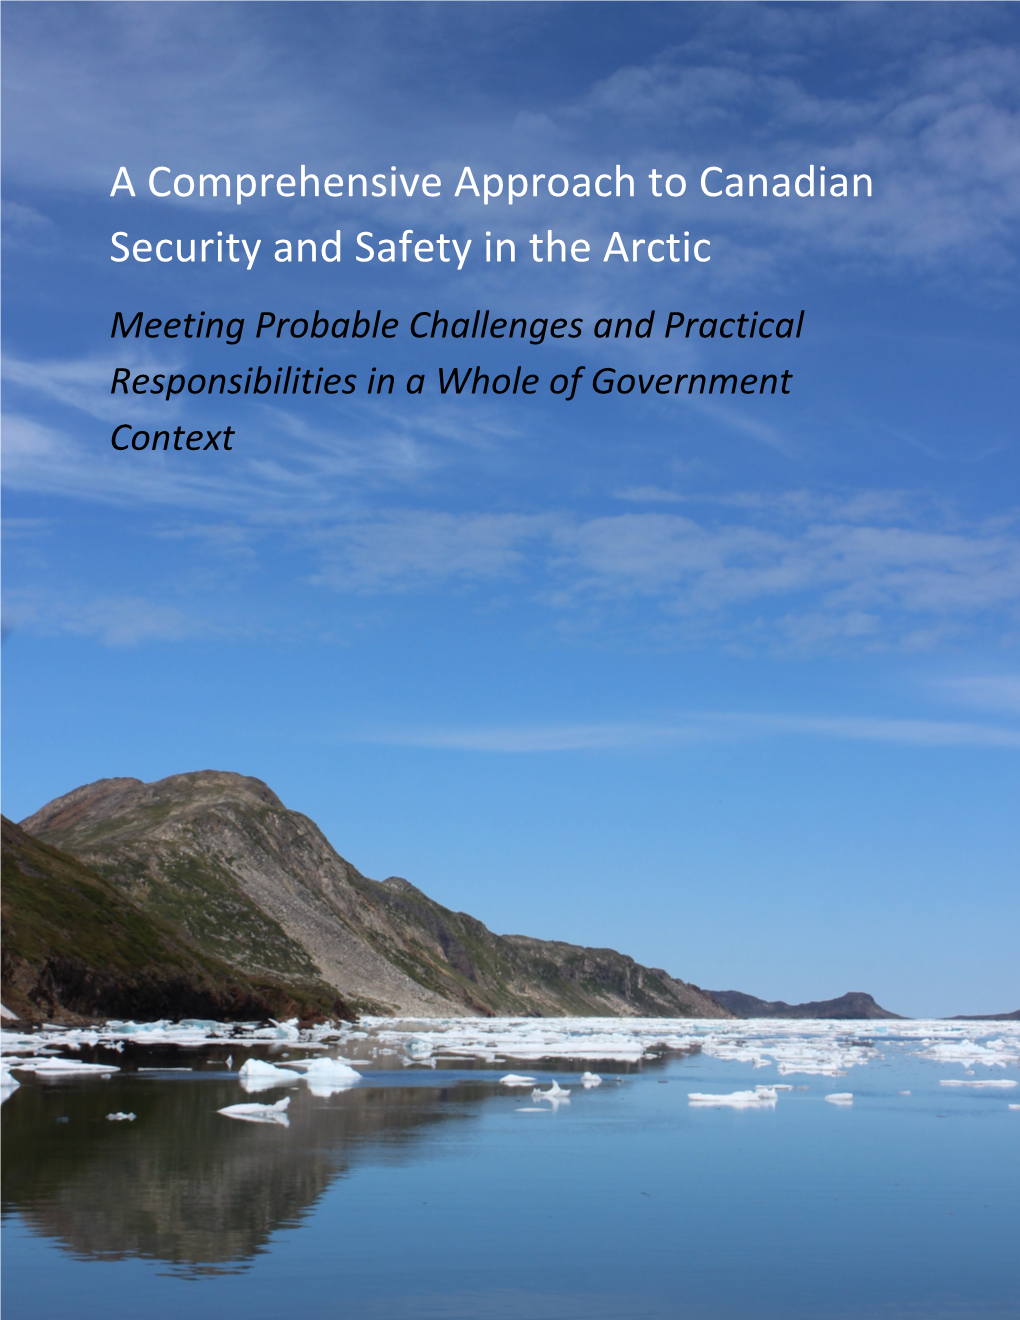 A Comprehensive Approach to Canadian Security and Safety in the Arctic Meeting Probable Challenges and Practical Responsibilities in a Whole of Government Context